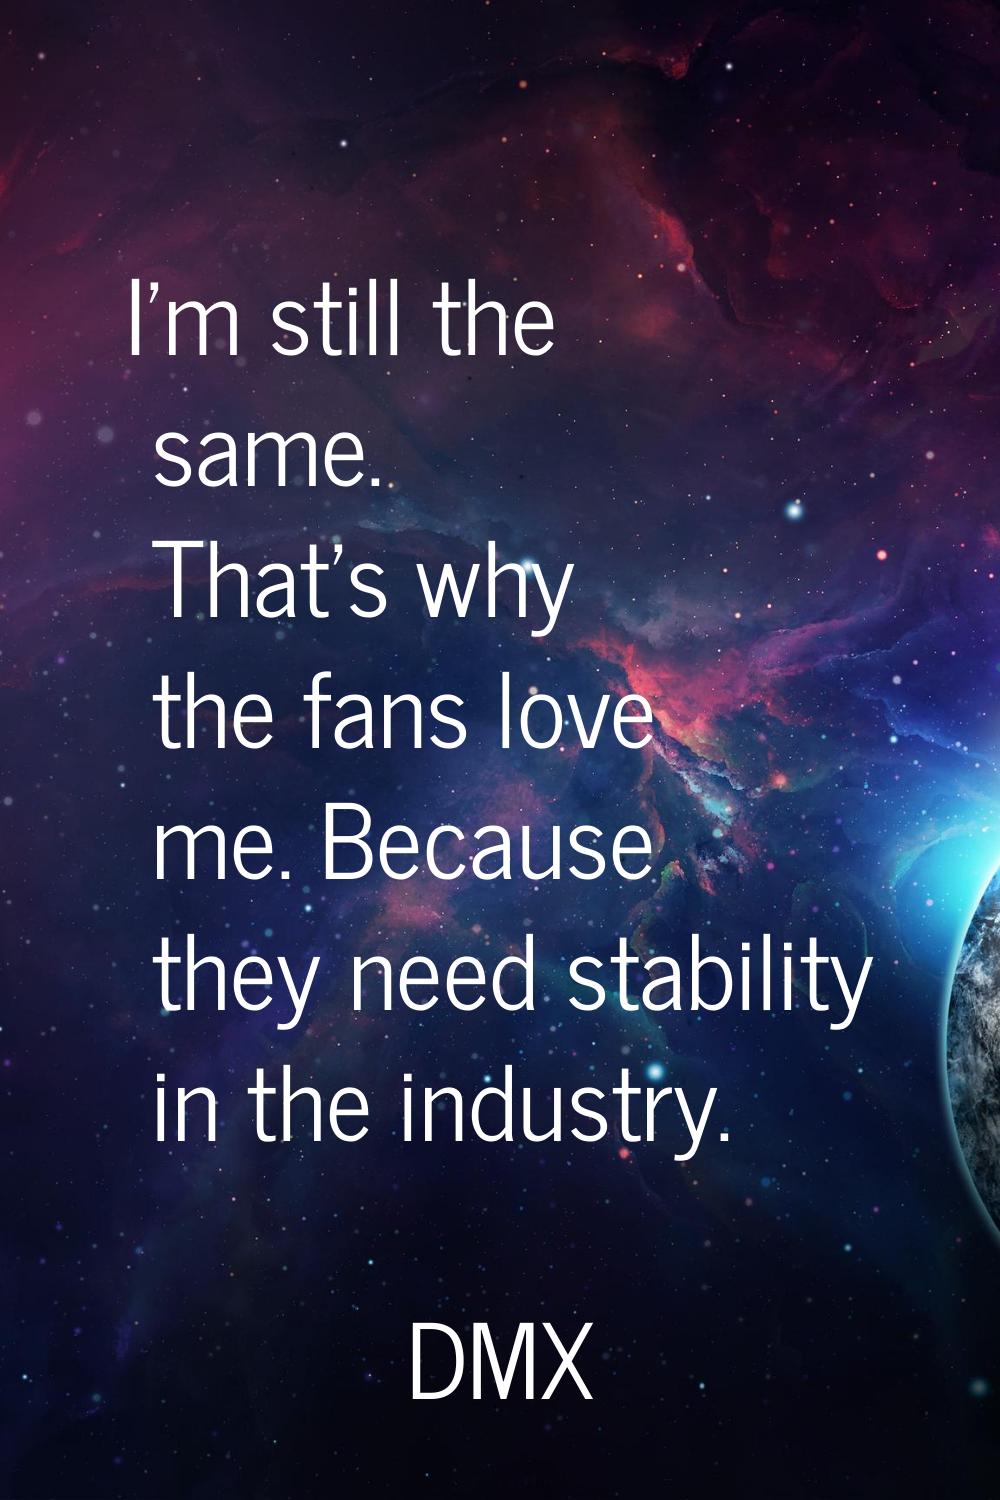 I'm still the same. That's why the fans love me. Because they need stability in the industry.